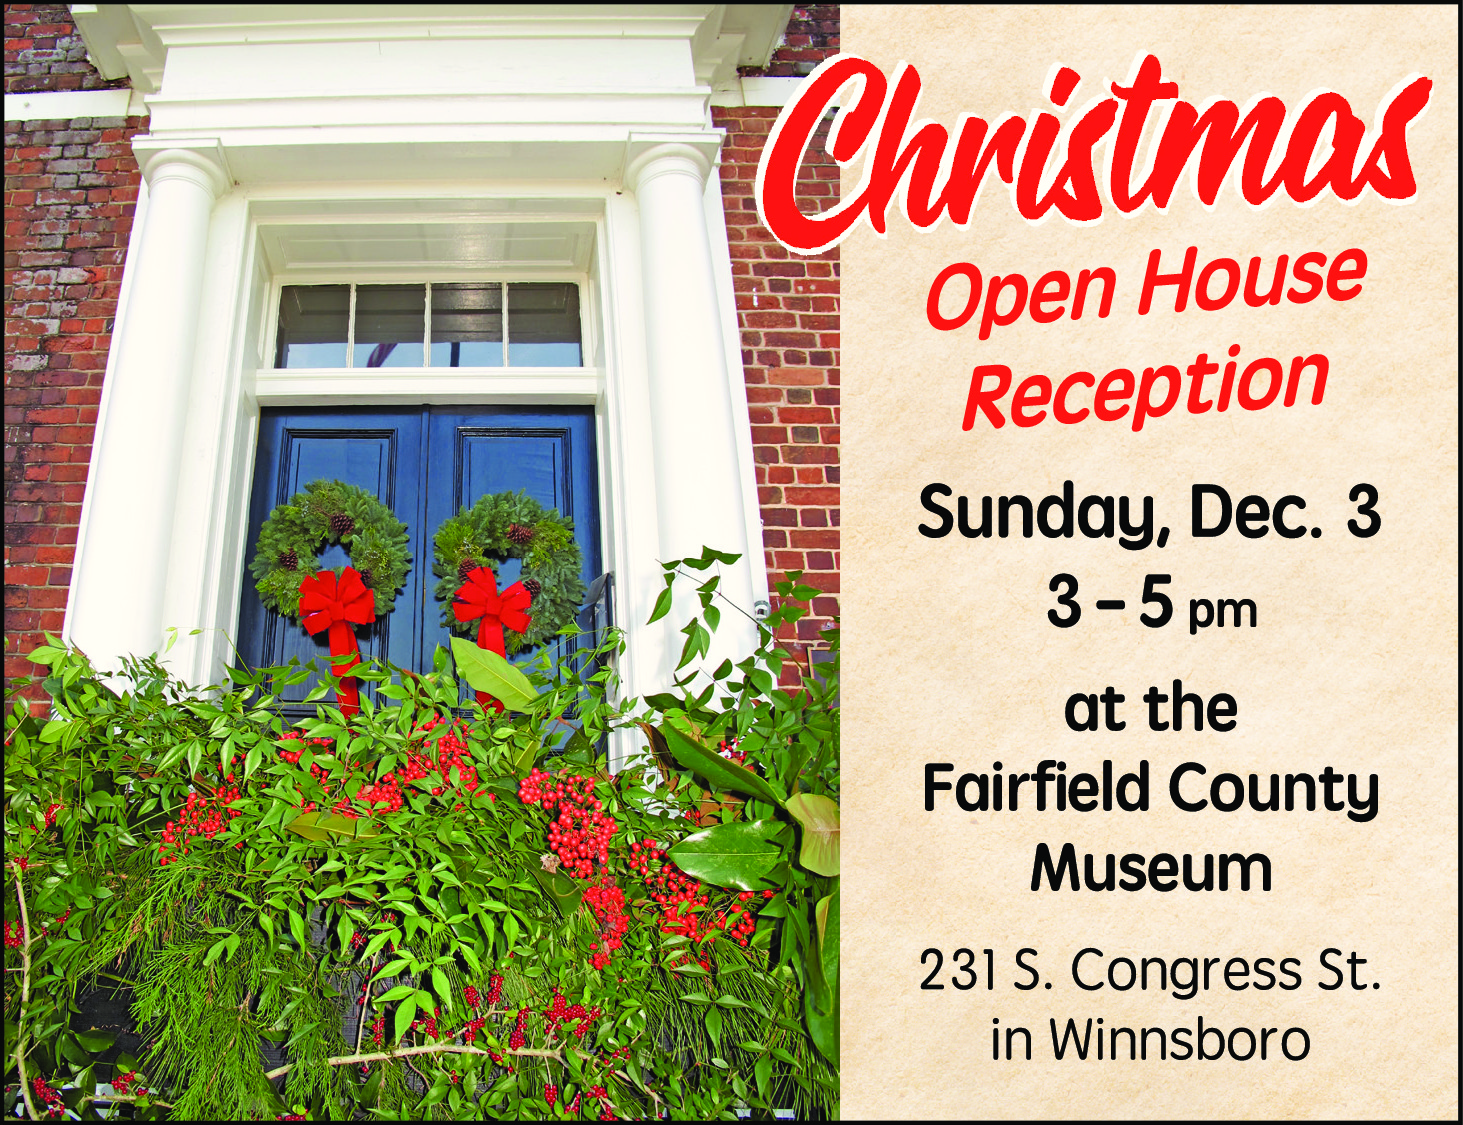 Featured image for Fairfield County Museum Christmas Open House Reception